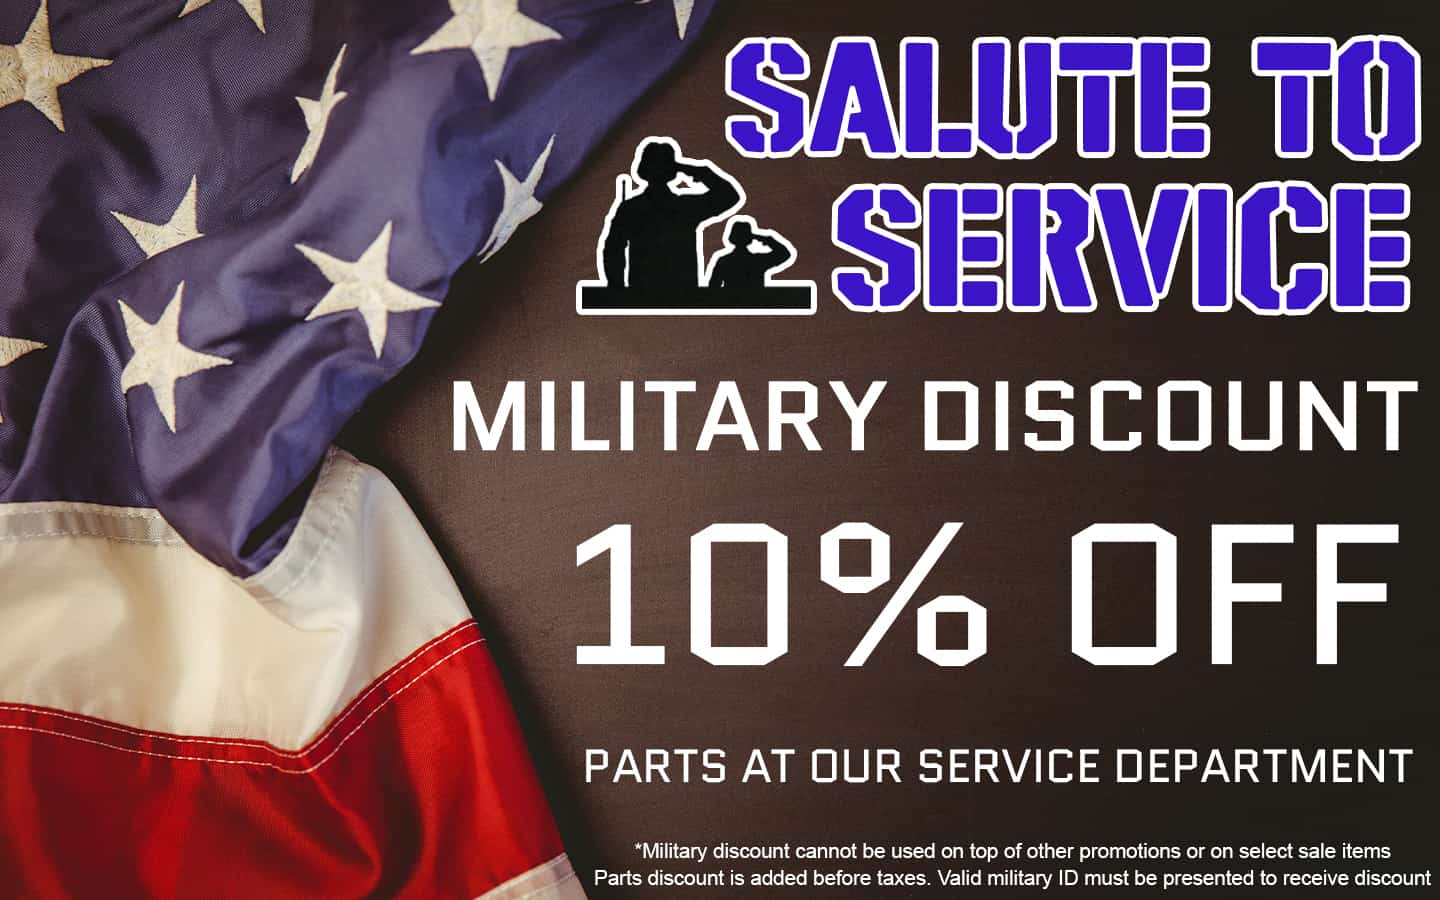 Military discount | Military Family in front of RV fifth wheel camper